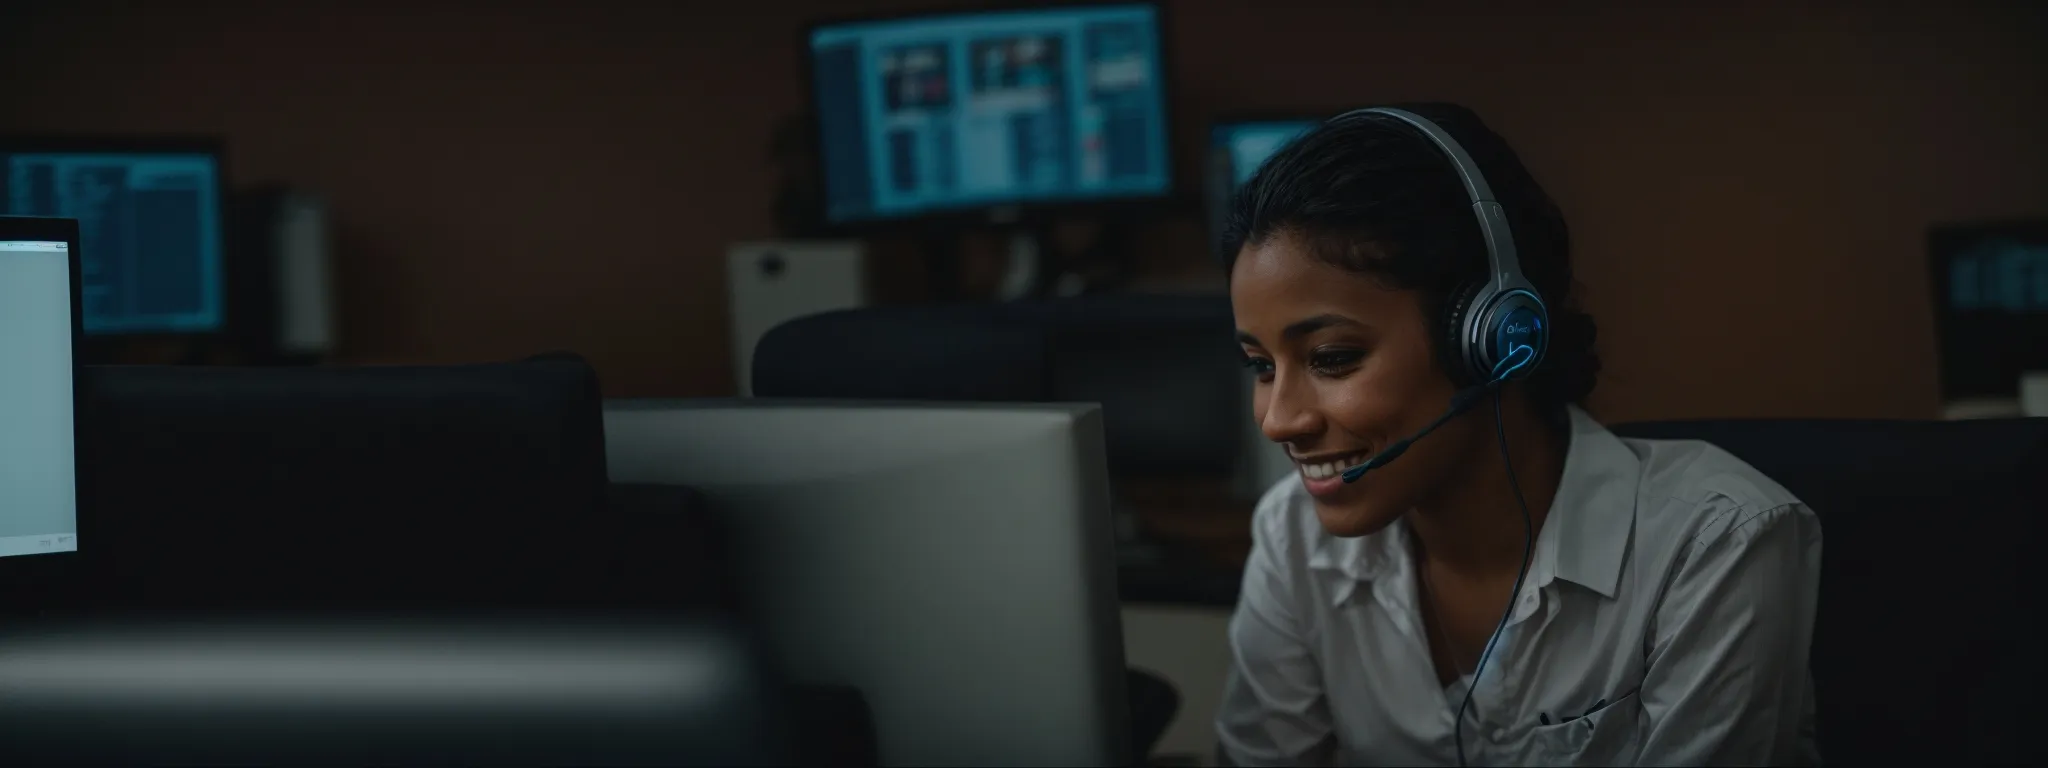 a customer service representative wearing a headset smiles while engaging with a client on a computer screen showing a live chat interface.